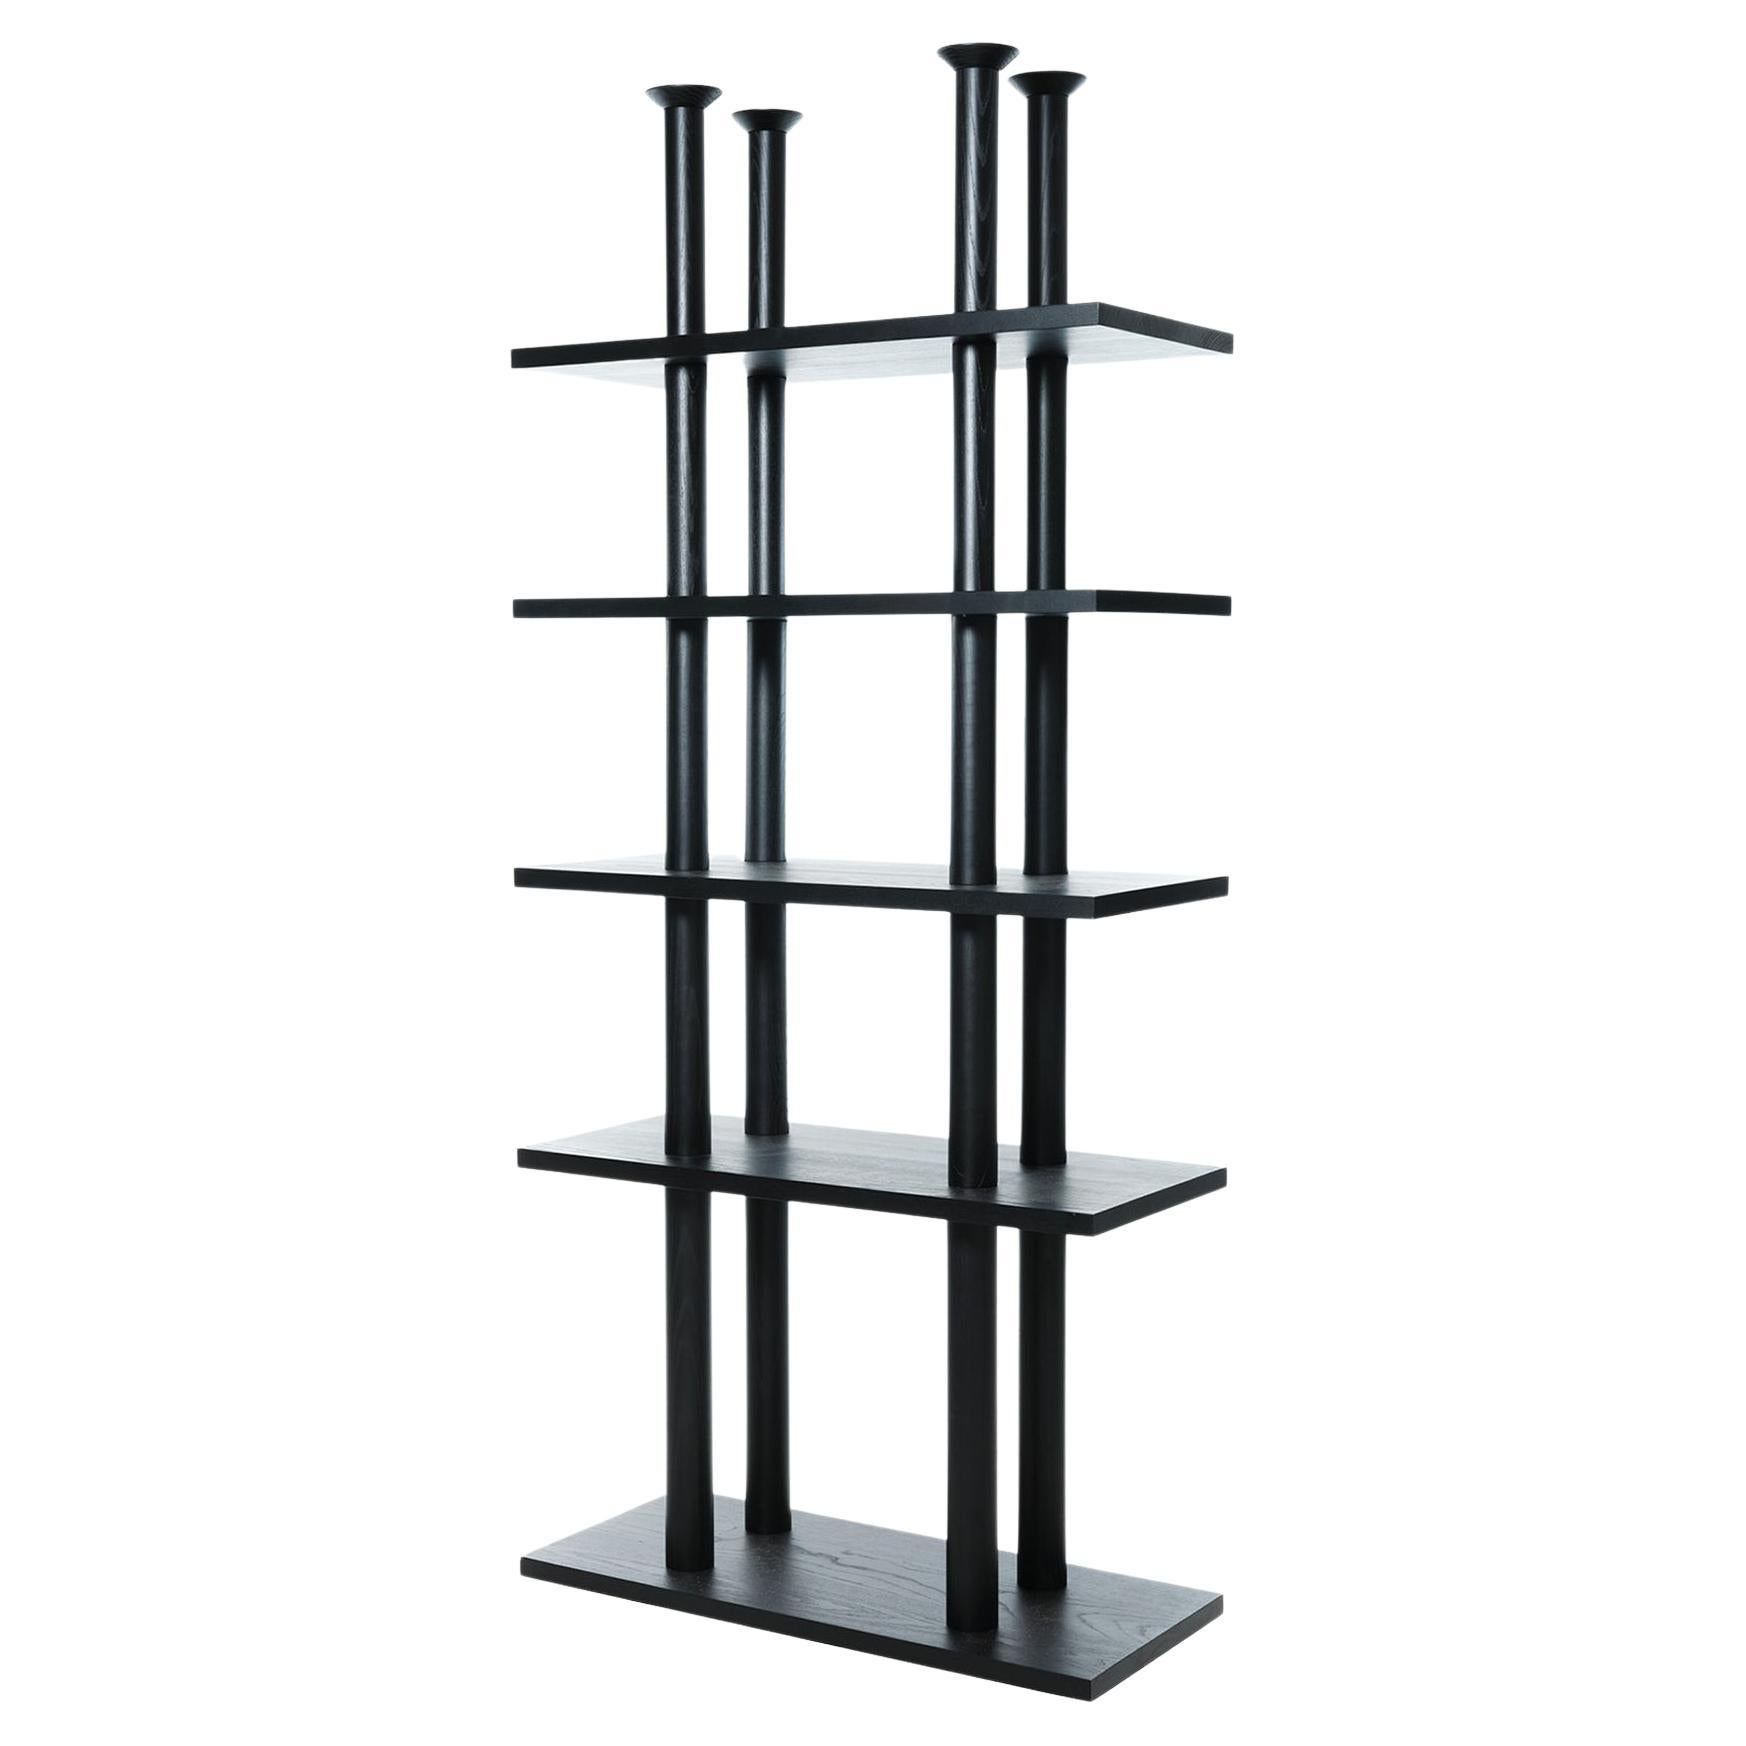 Peristylo 4 Shelves by Oscar Tusquets For Sale